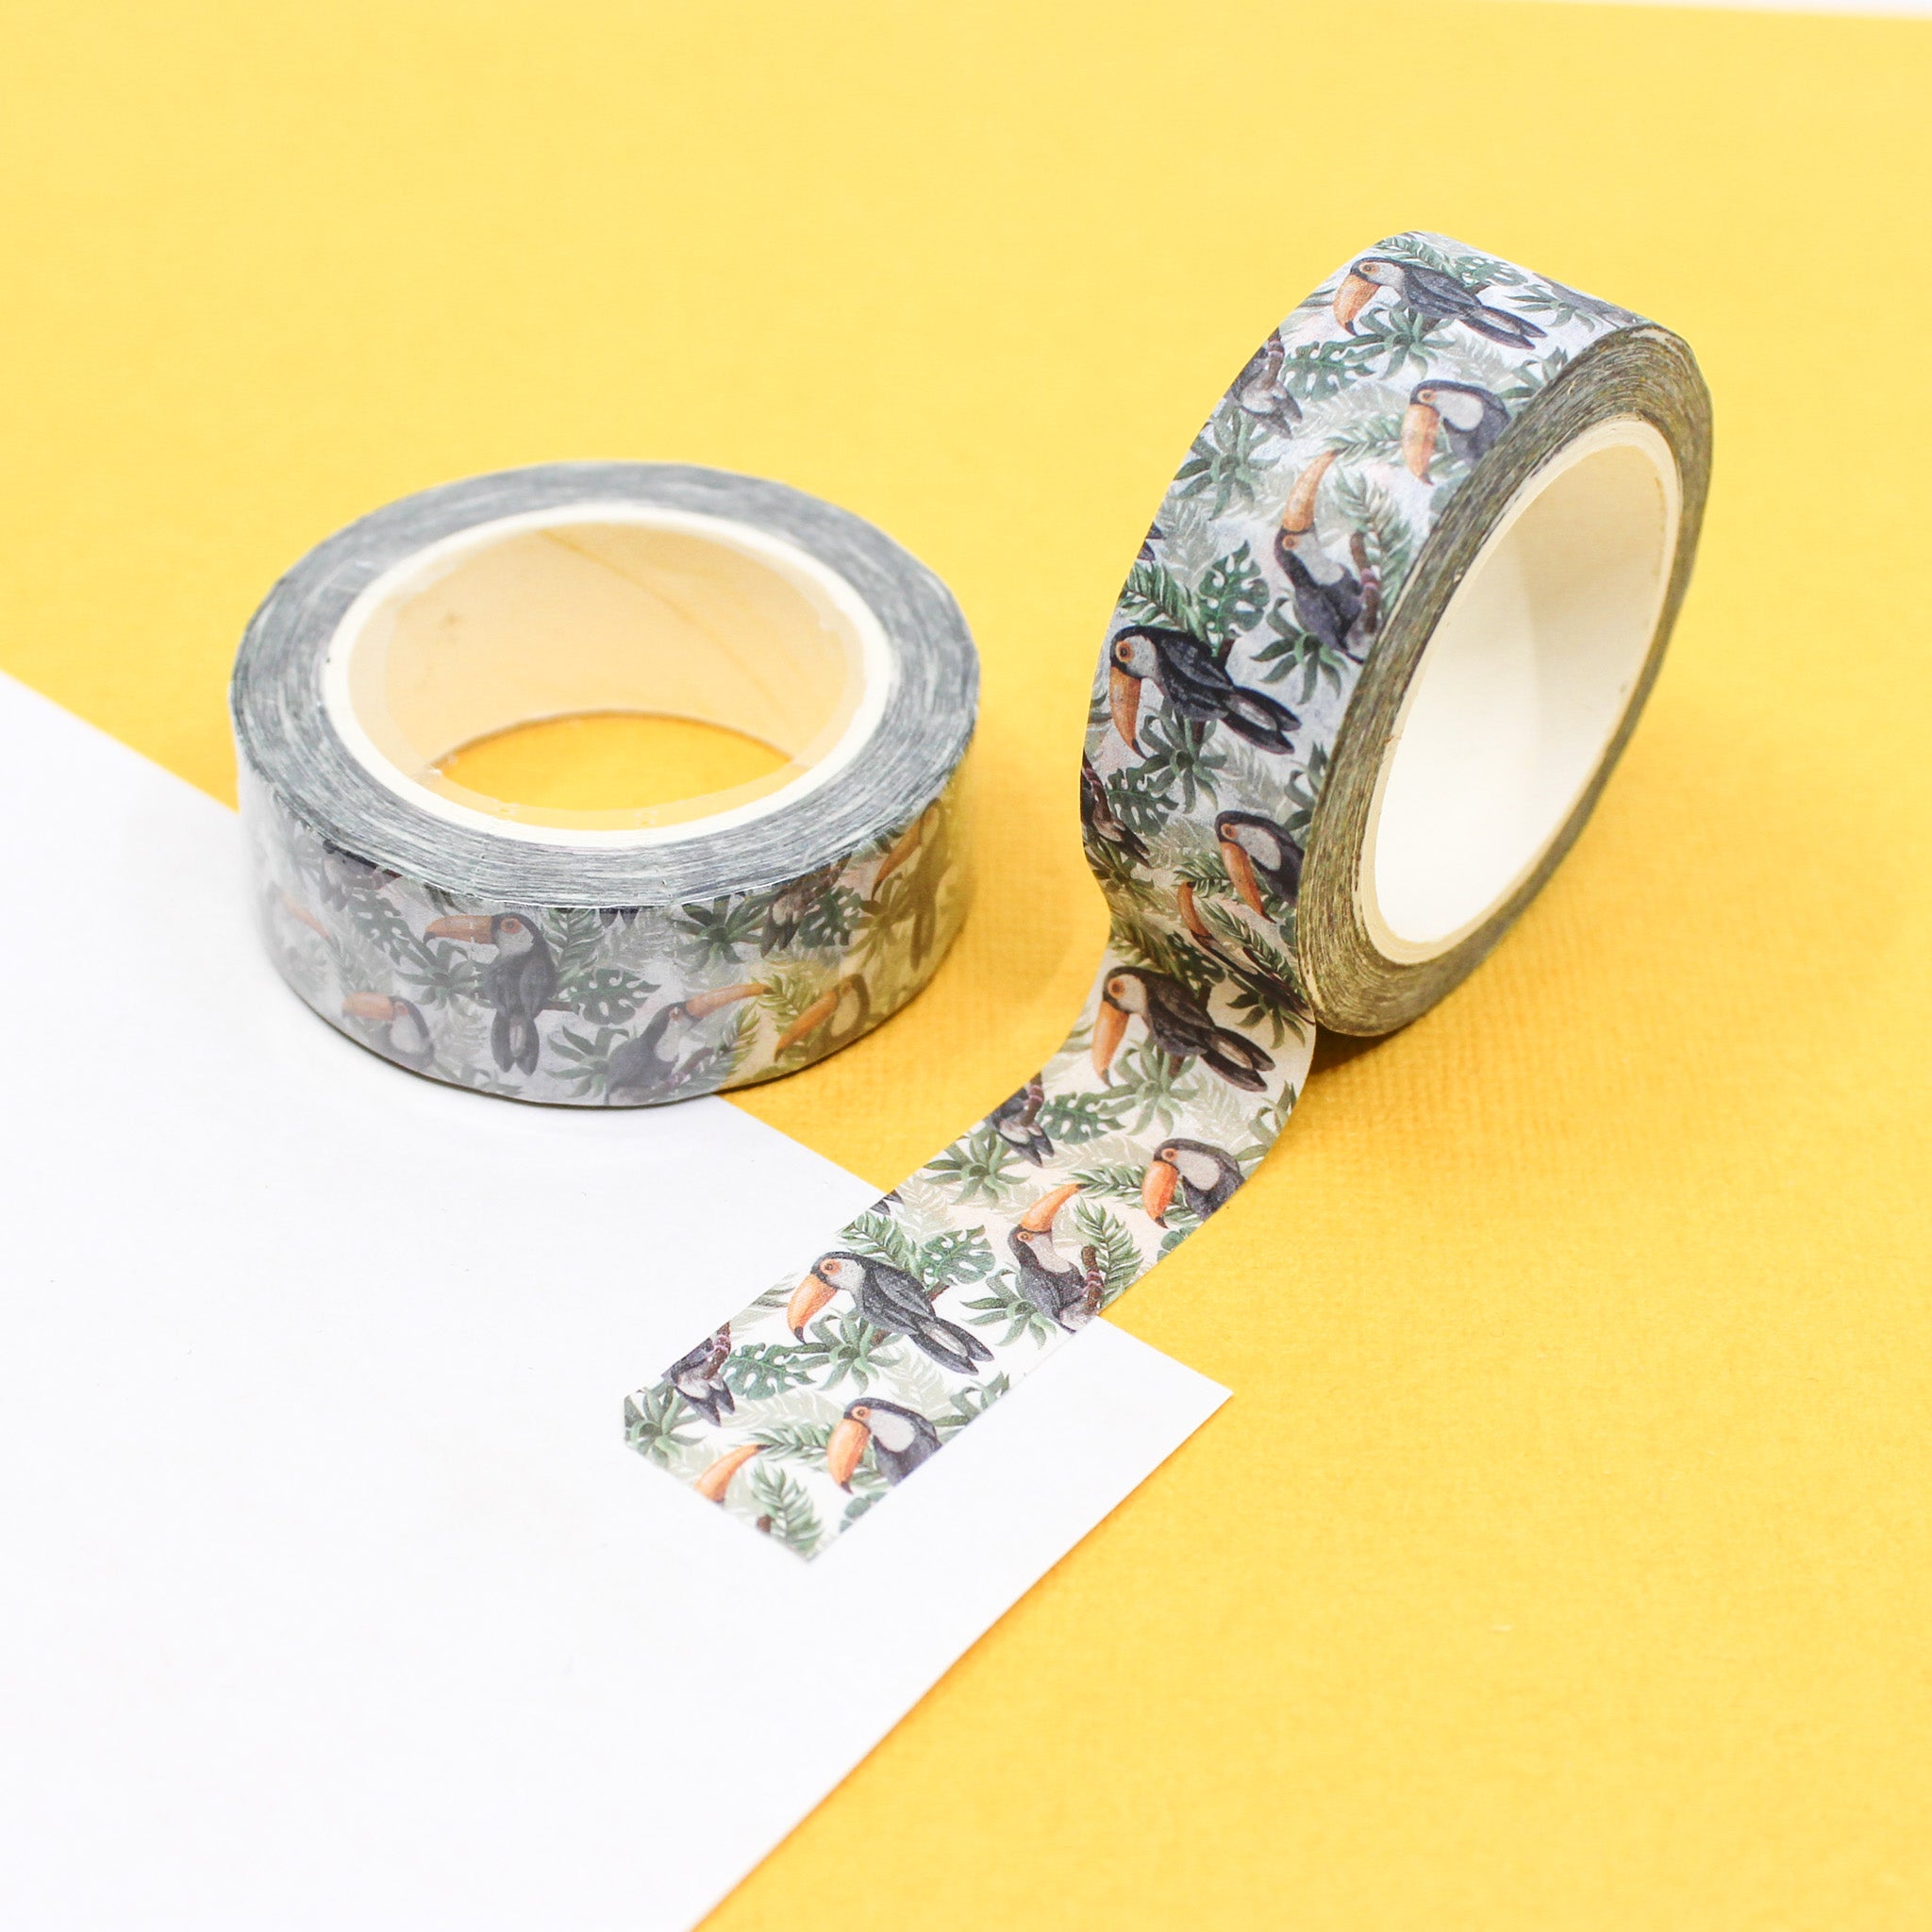 This is a tropical birds pattern washi tape from BBB Supplies Craft Shop